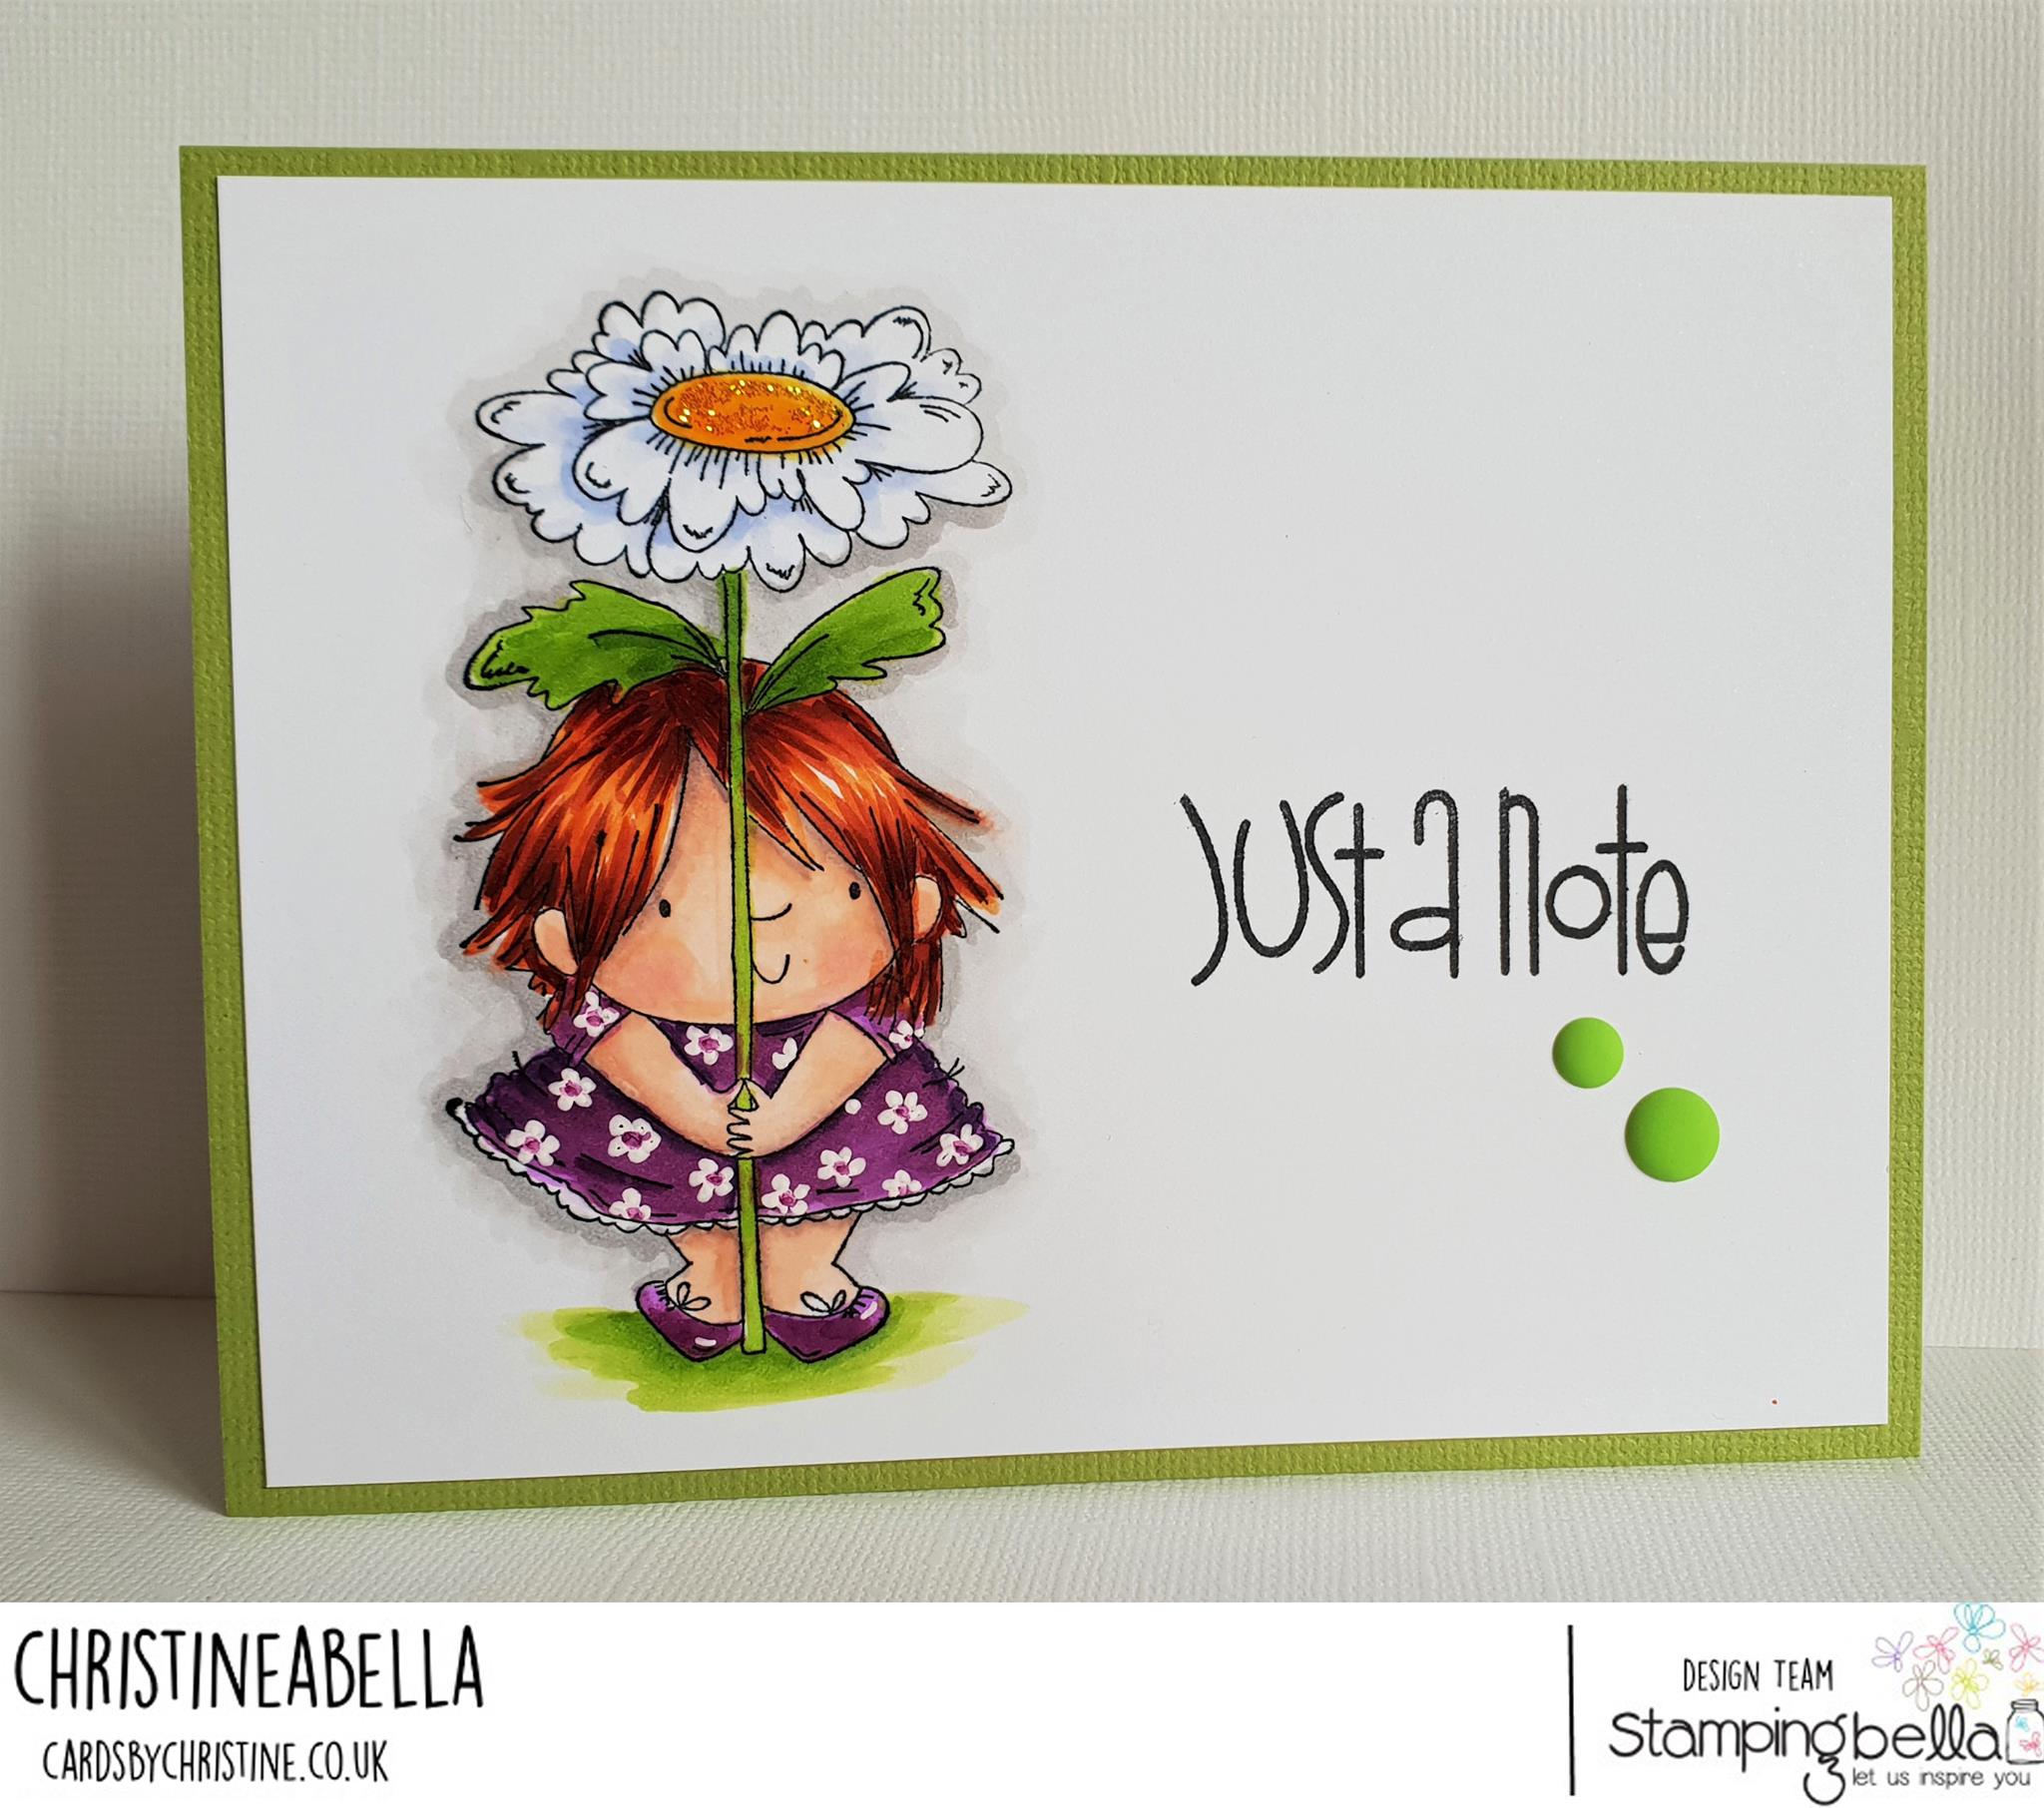 www.stampingbella.com: rubber stamp used: DAISY SQUIDGY, card made by Christine Levison